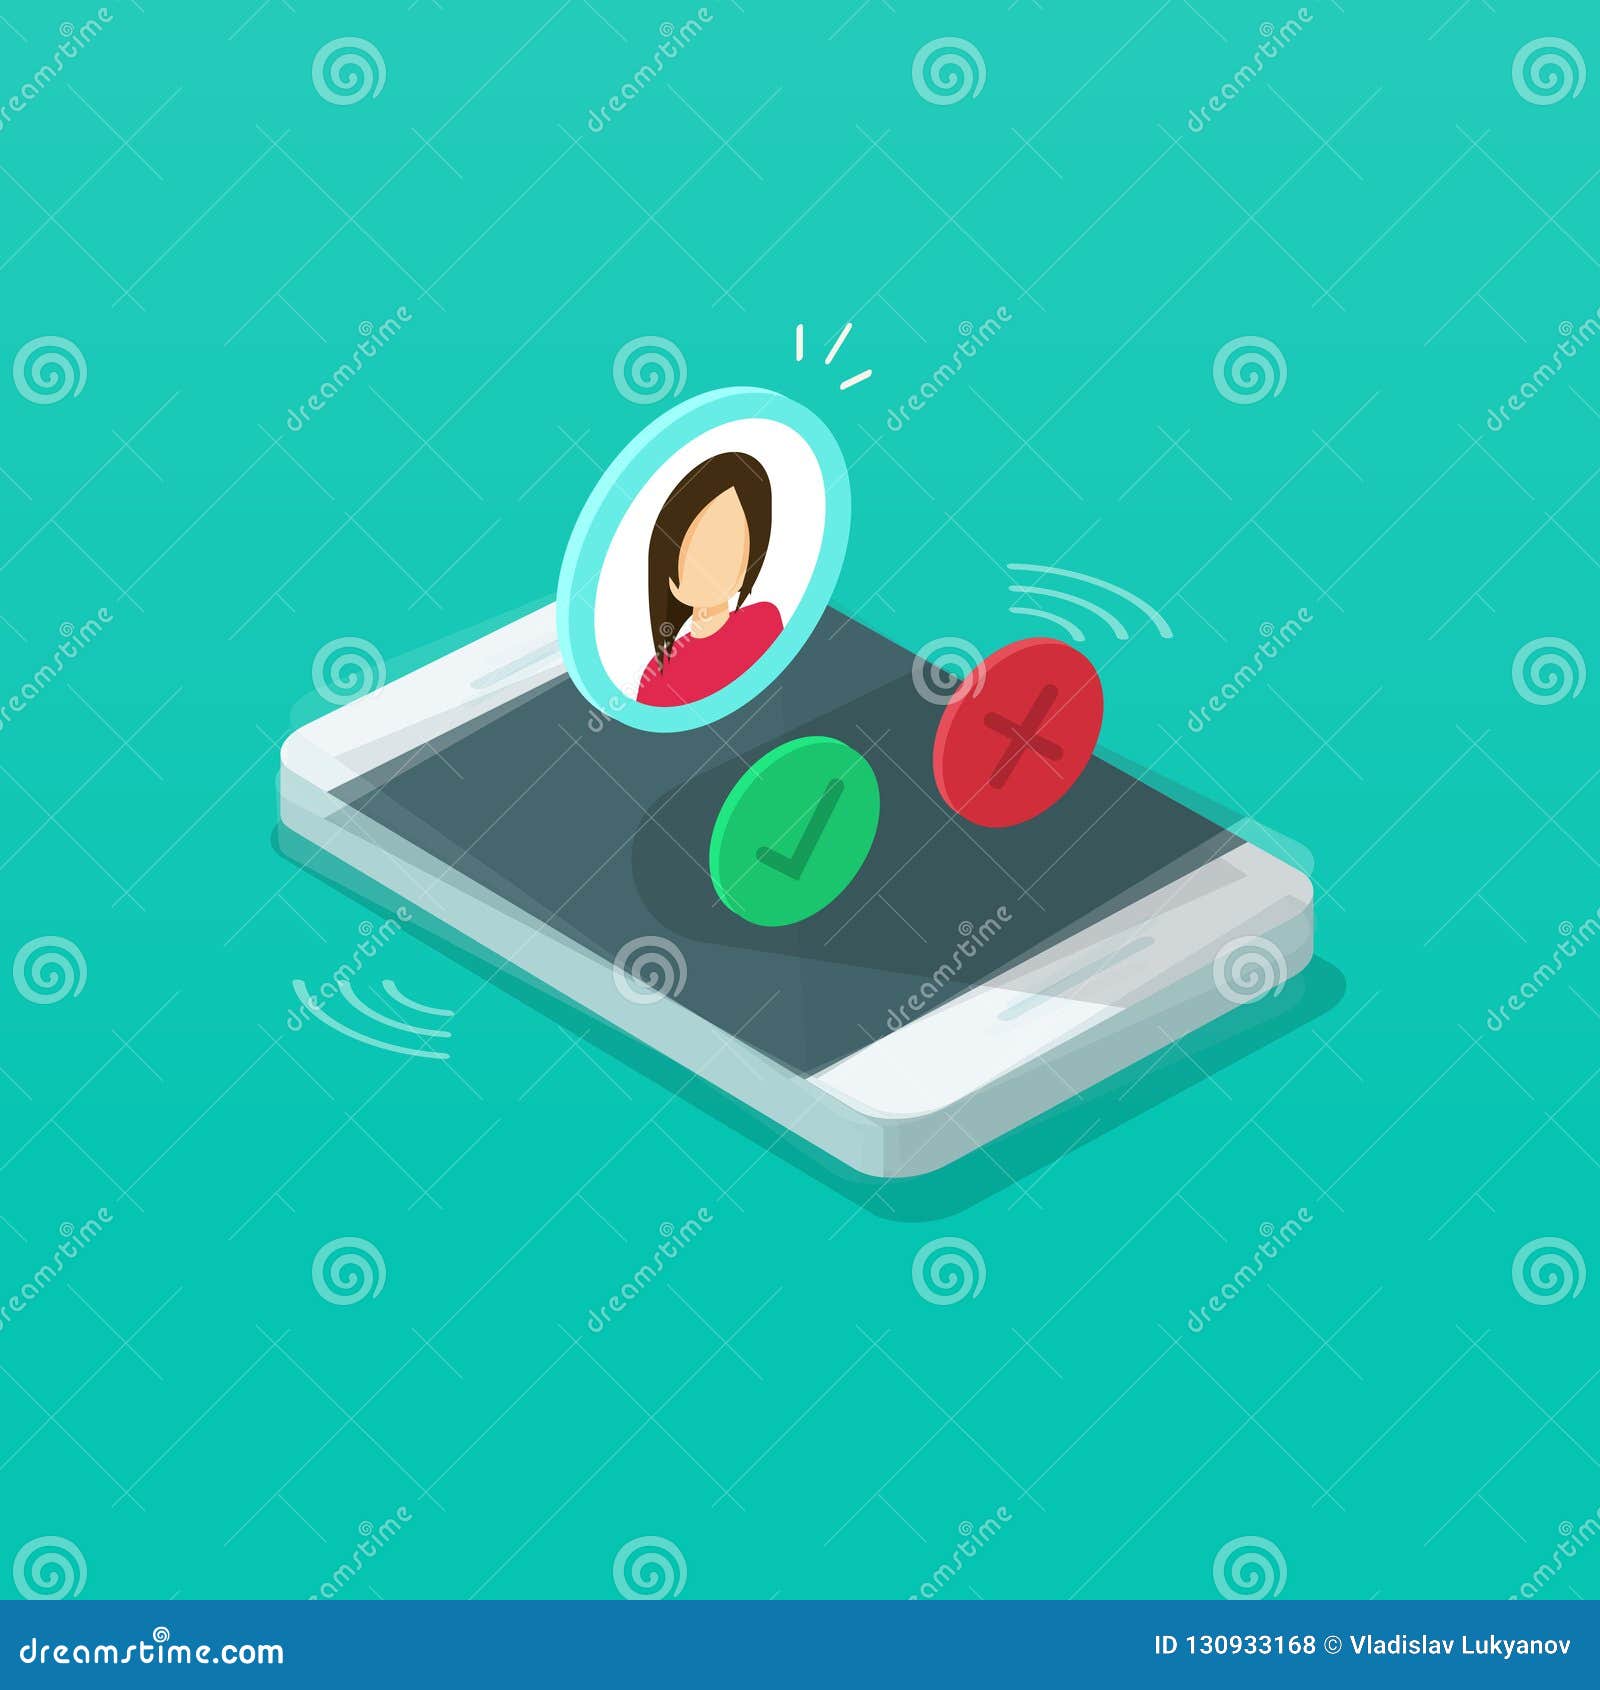 mobile phone ringing  , isometric cartoon cellphone call or vibrate with contact info on display